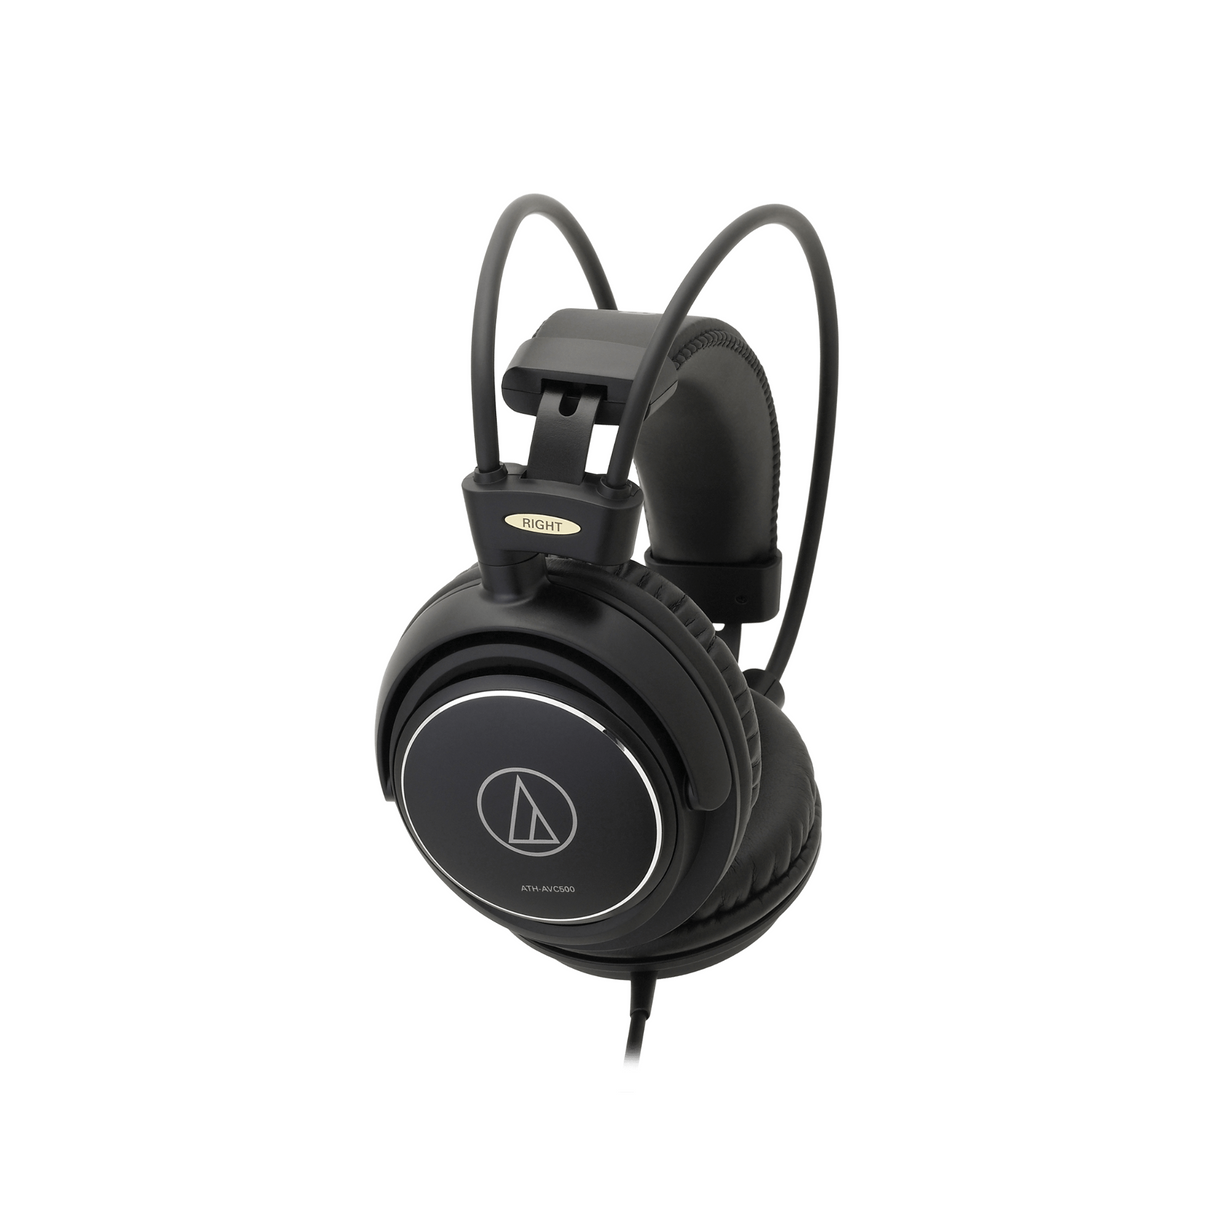 Audio Technica ATHAVC500 Closed-Back Dynamic Headphones